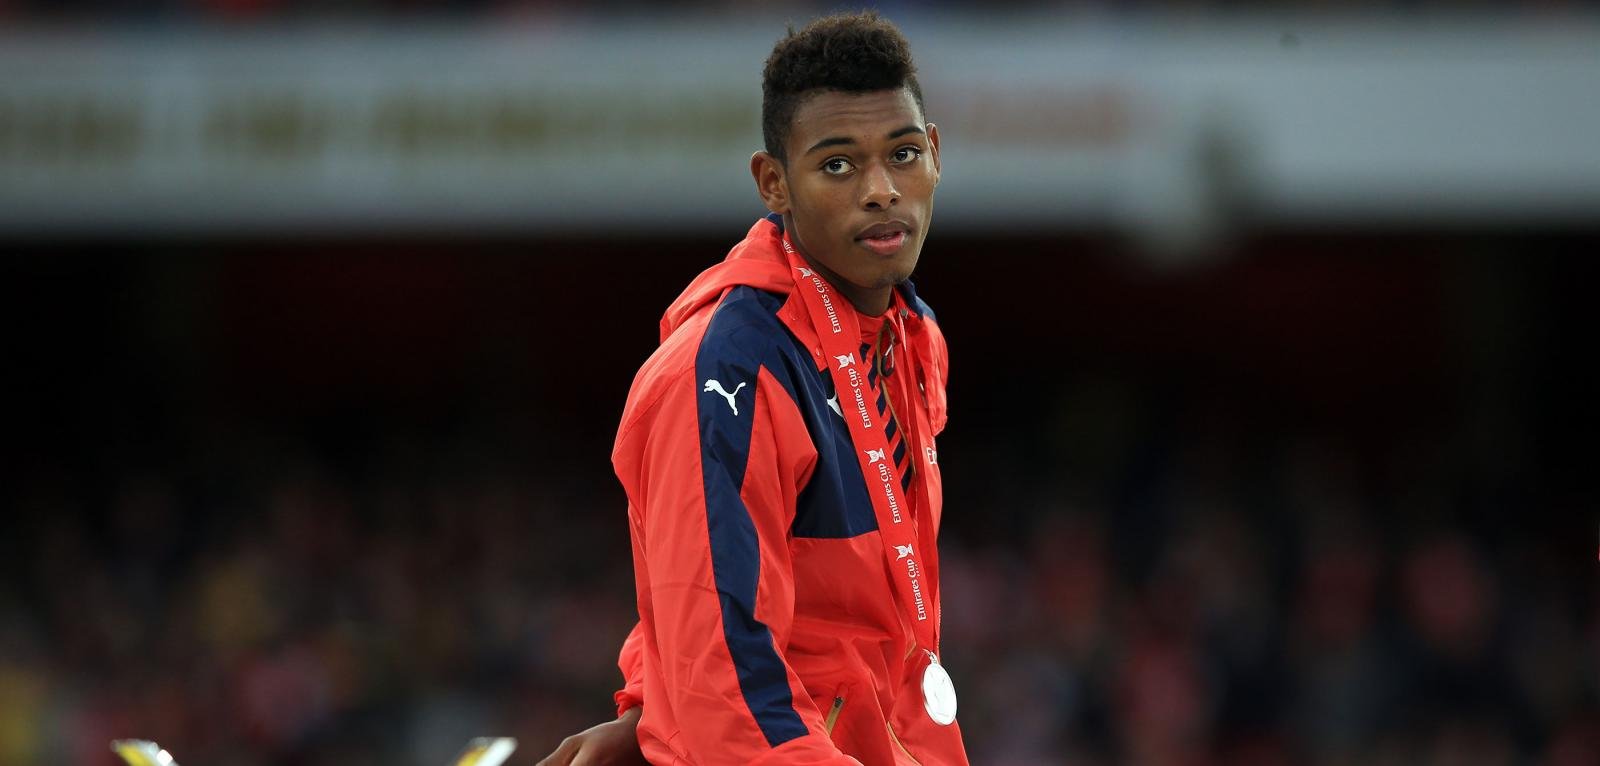 One to Watch: Jeff Reine-Adelaide